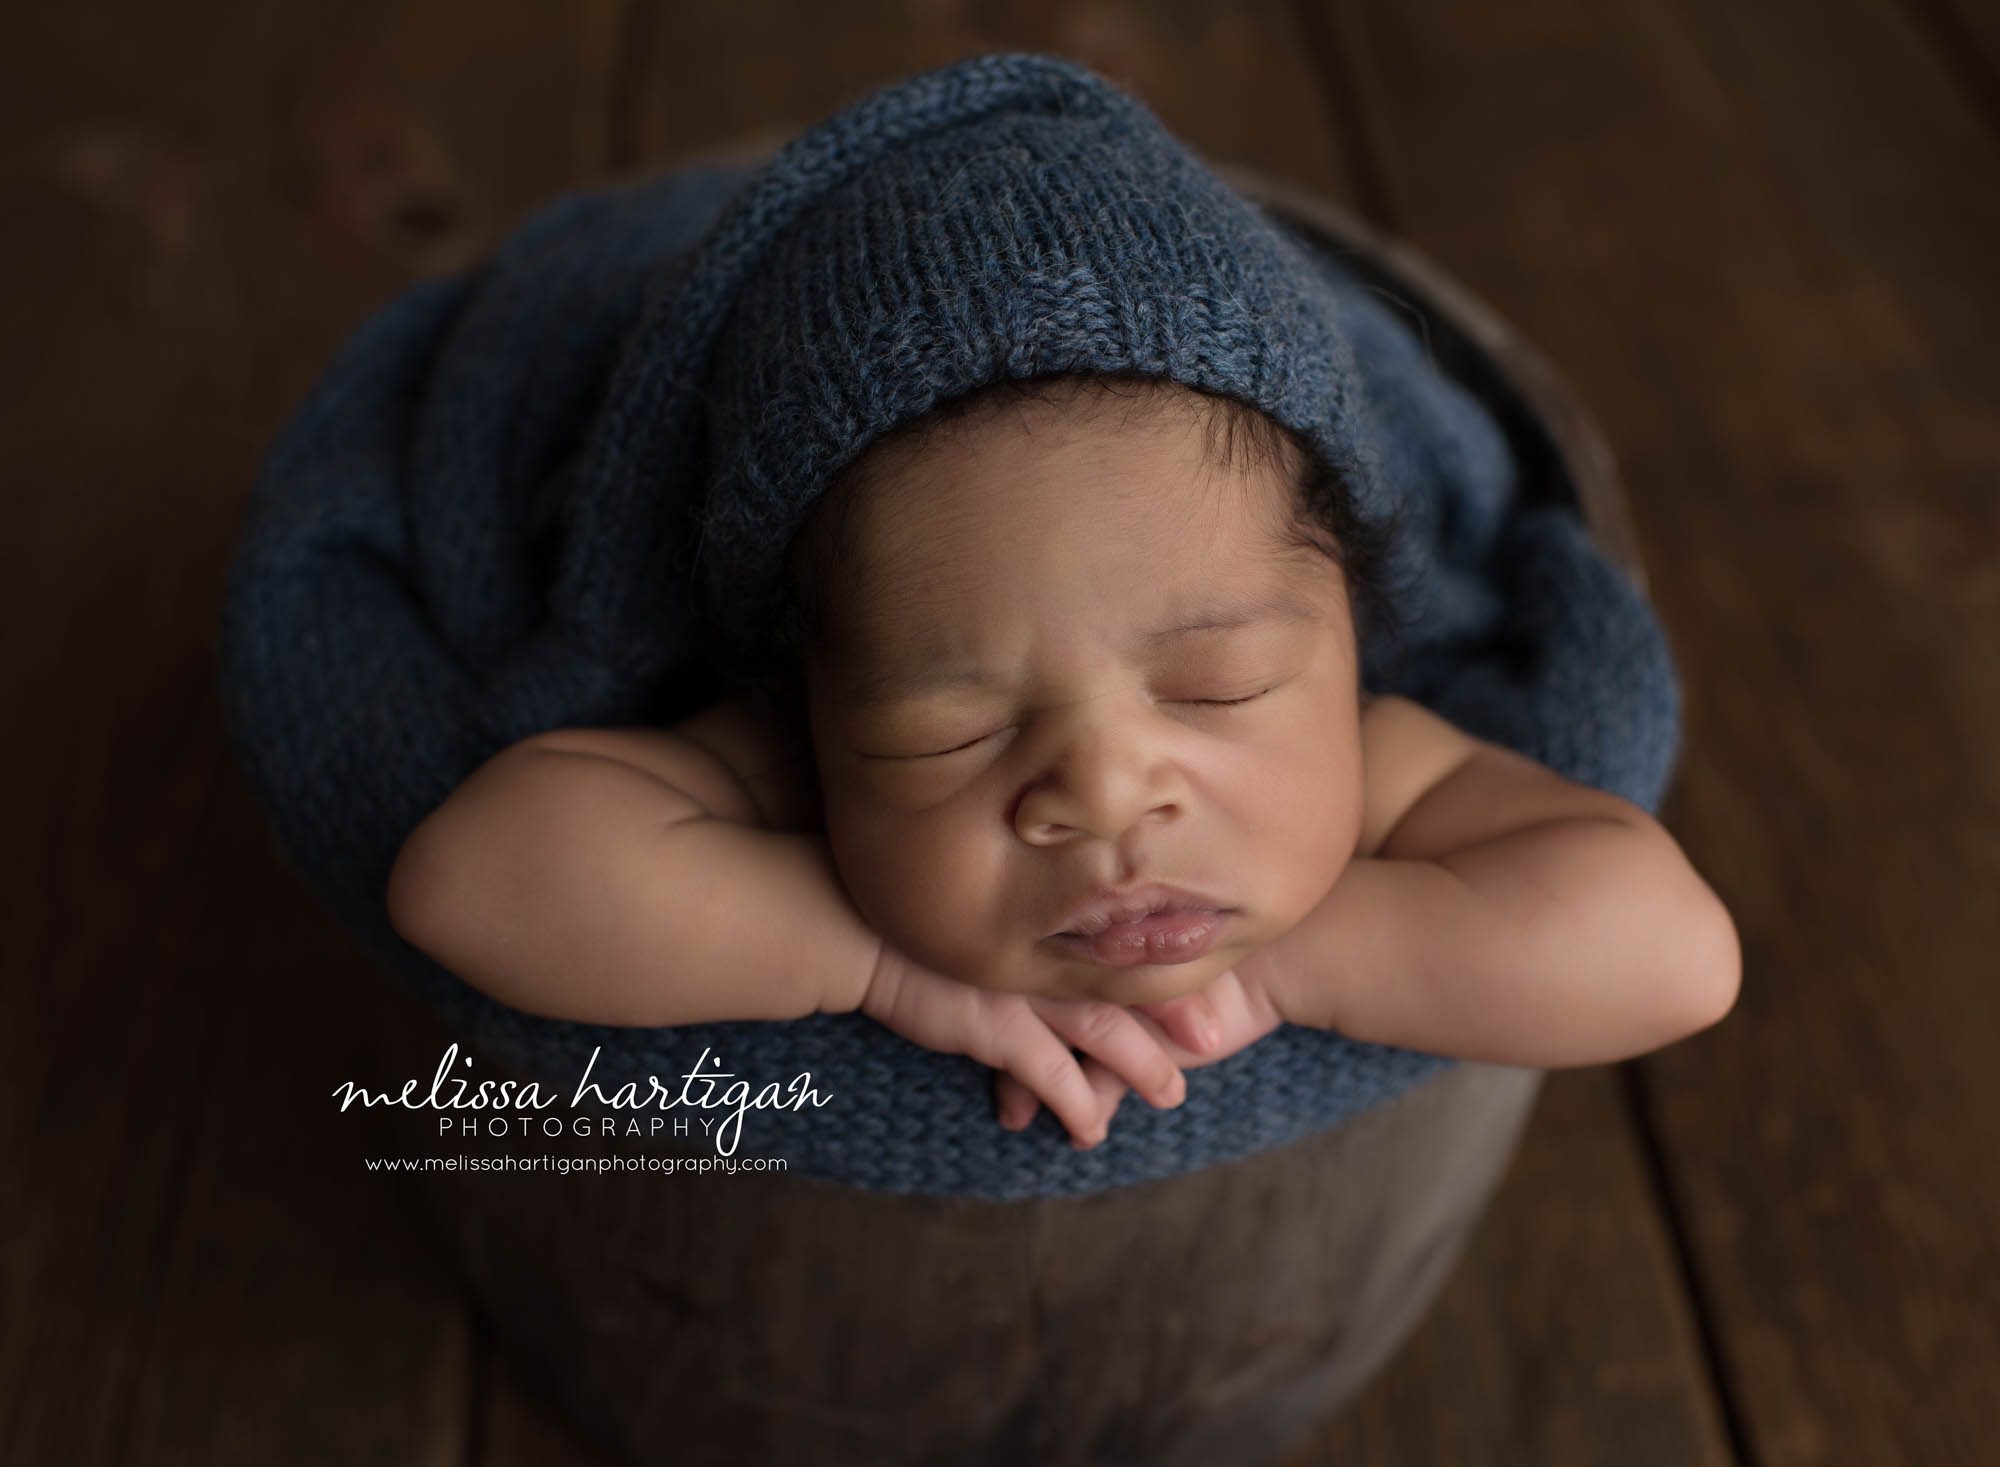 Melissa Hartigan Photography Connecticut Maternity and Newborn CT Photographer Coventry Ct Middlefield CT baby Fairfield county Newborn pose baby boy wooden bucket with dark blue blanket and wearing blue knitted hat